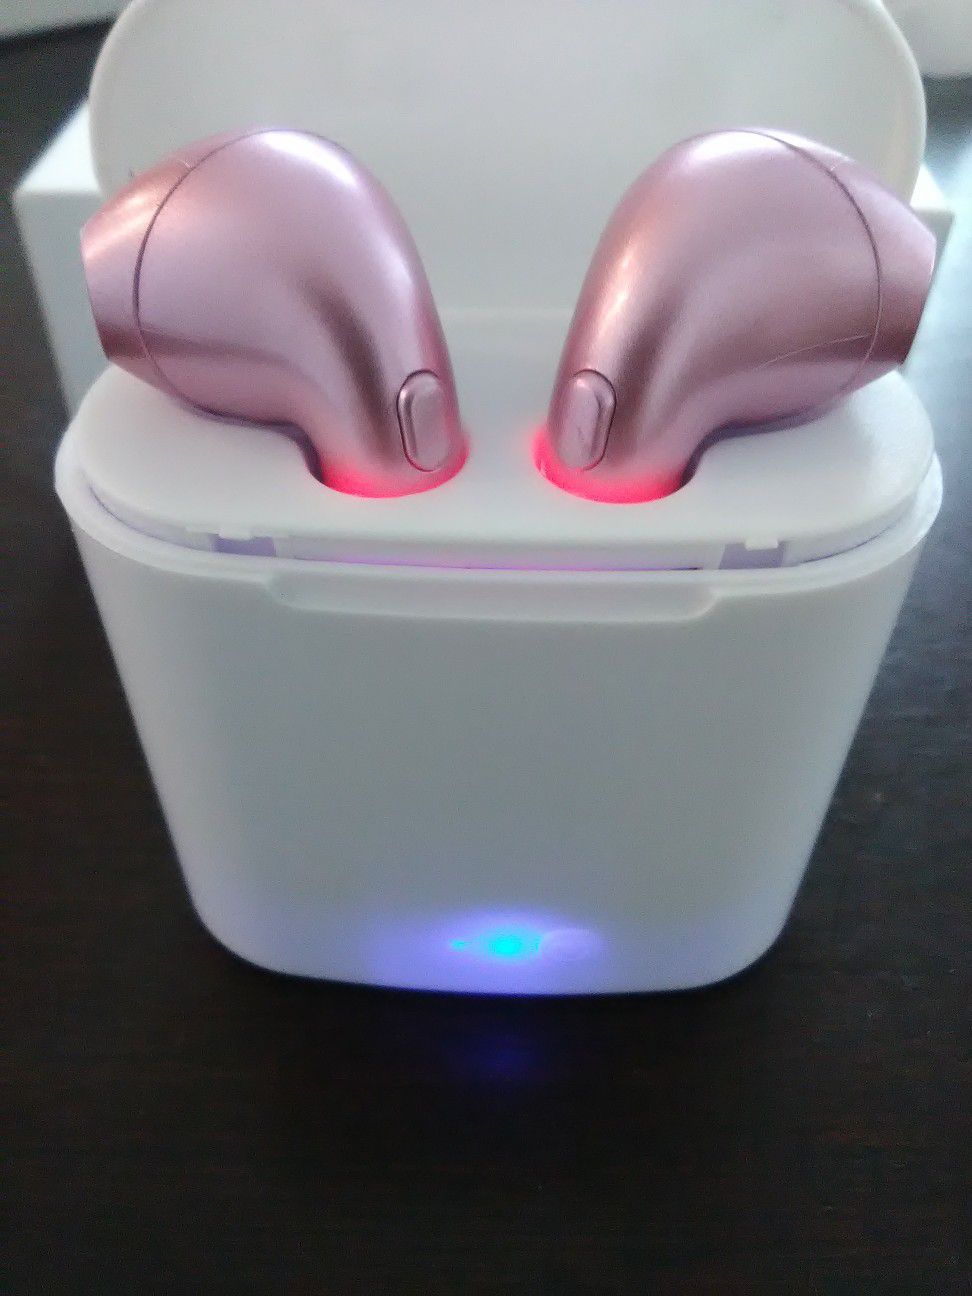 Brand new pink wireless Bluetooth headphones earbuds with wireless charger box included. These are not airpods